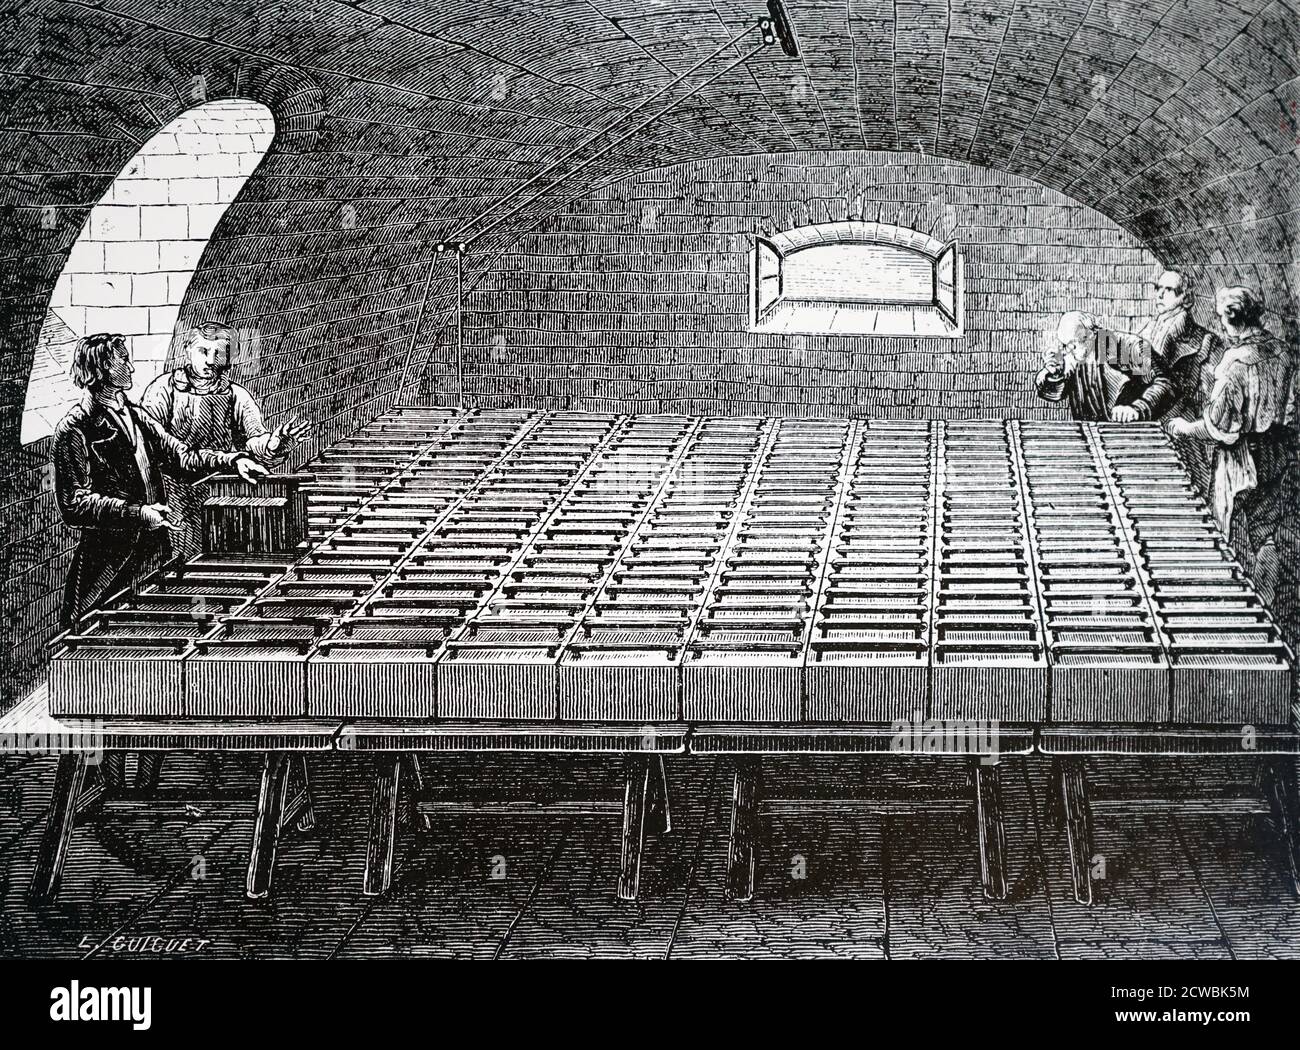 Engraving depicting the giant battery built in the basement of the Royal  Institution, London, by Humphry Davy. The battery was composed of 200  Wollaston piles Stock Photo - Alamy